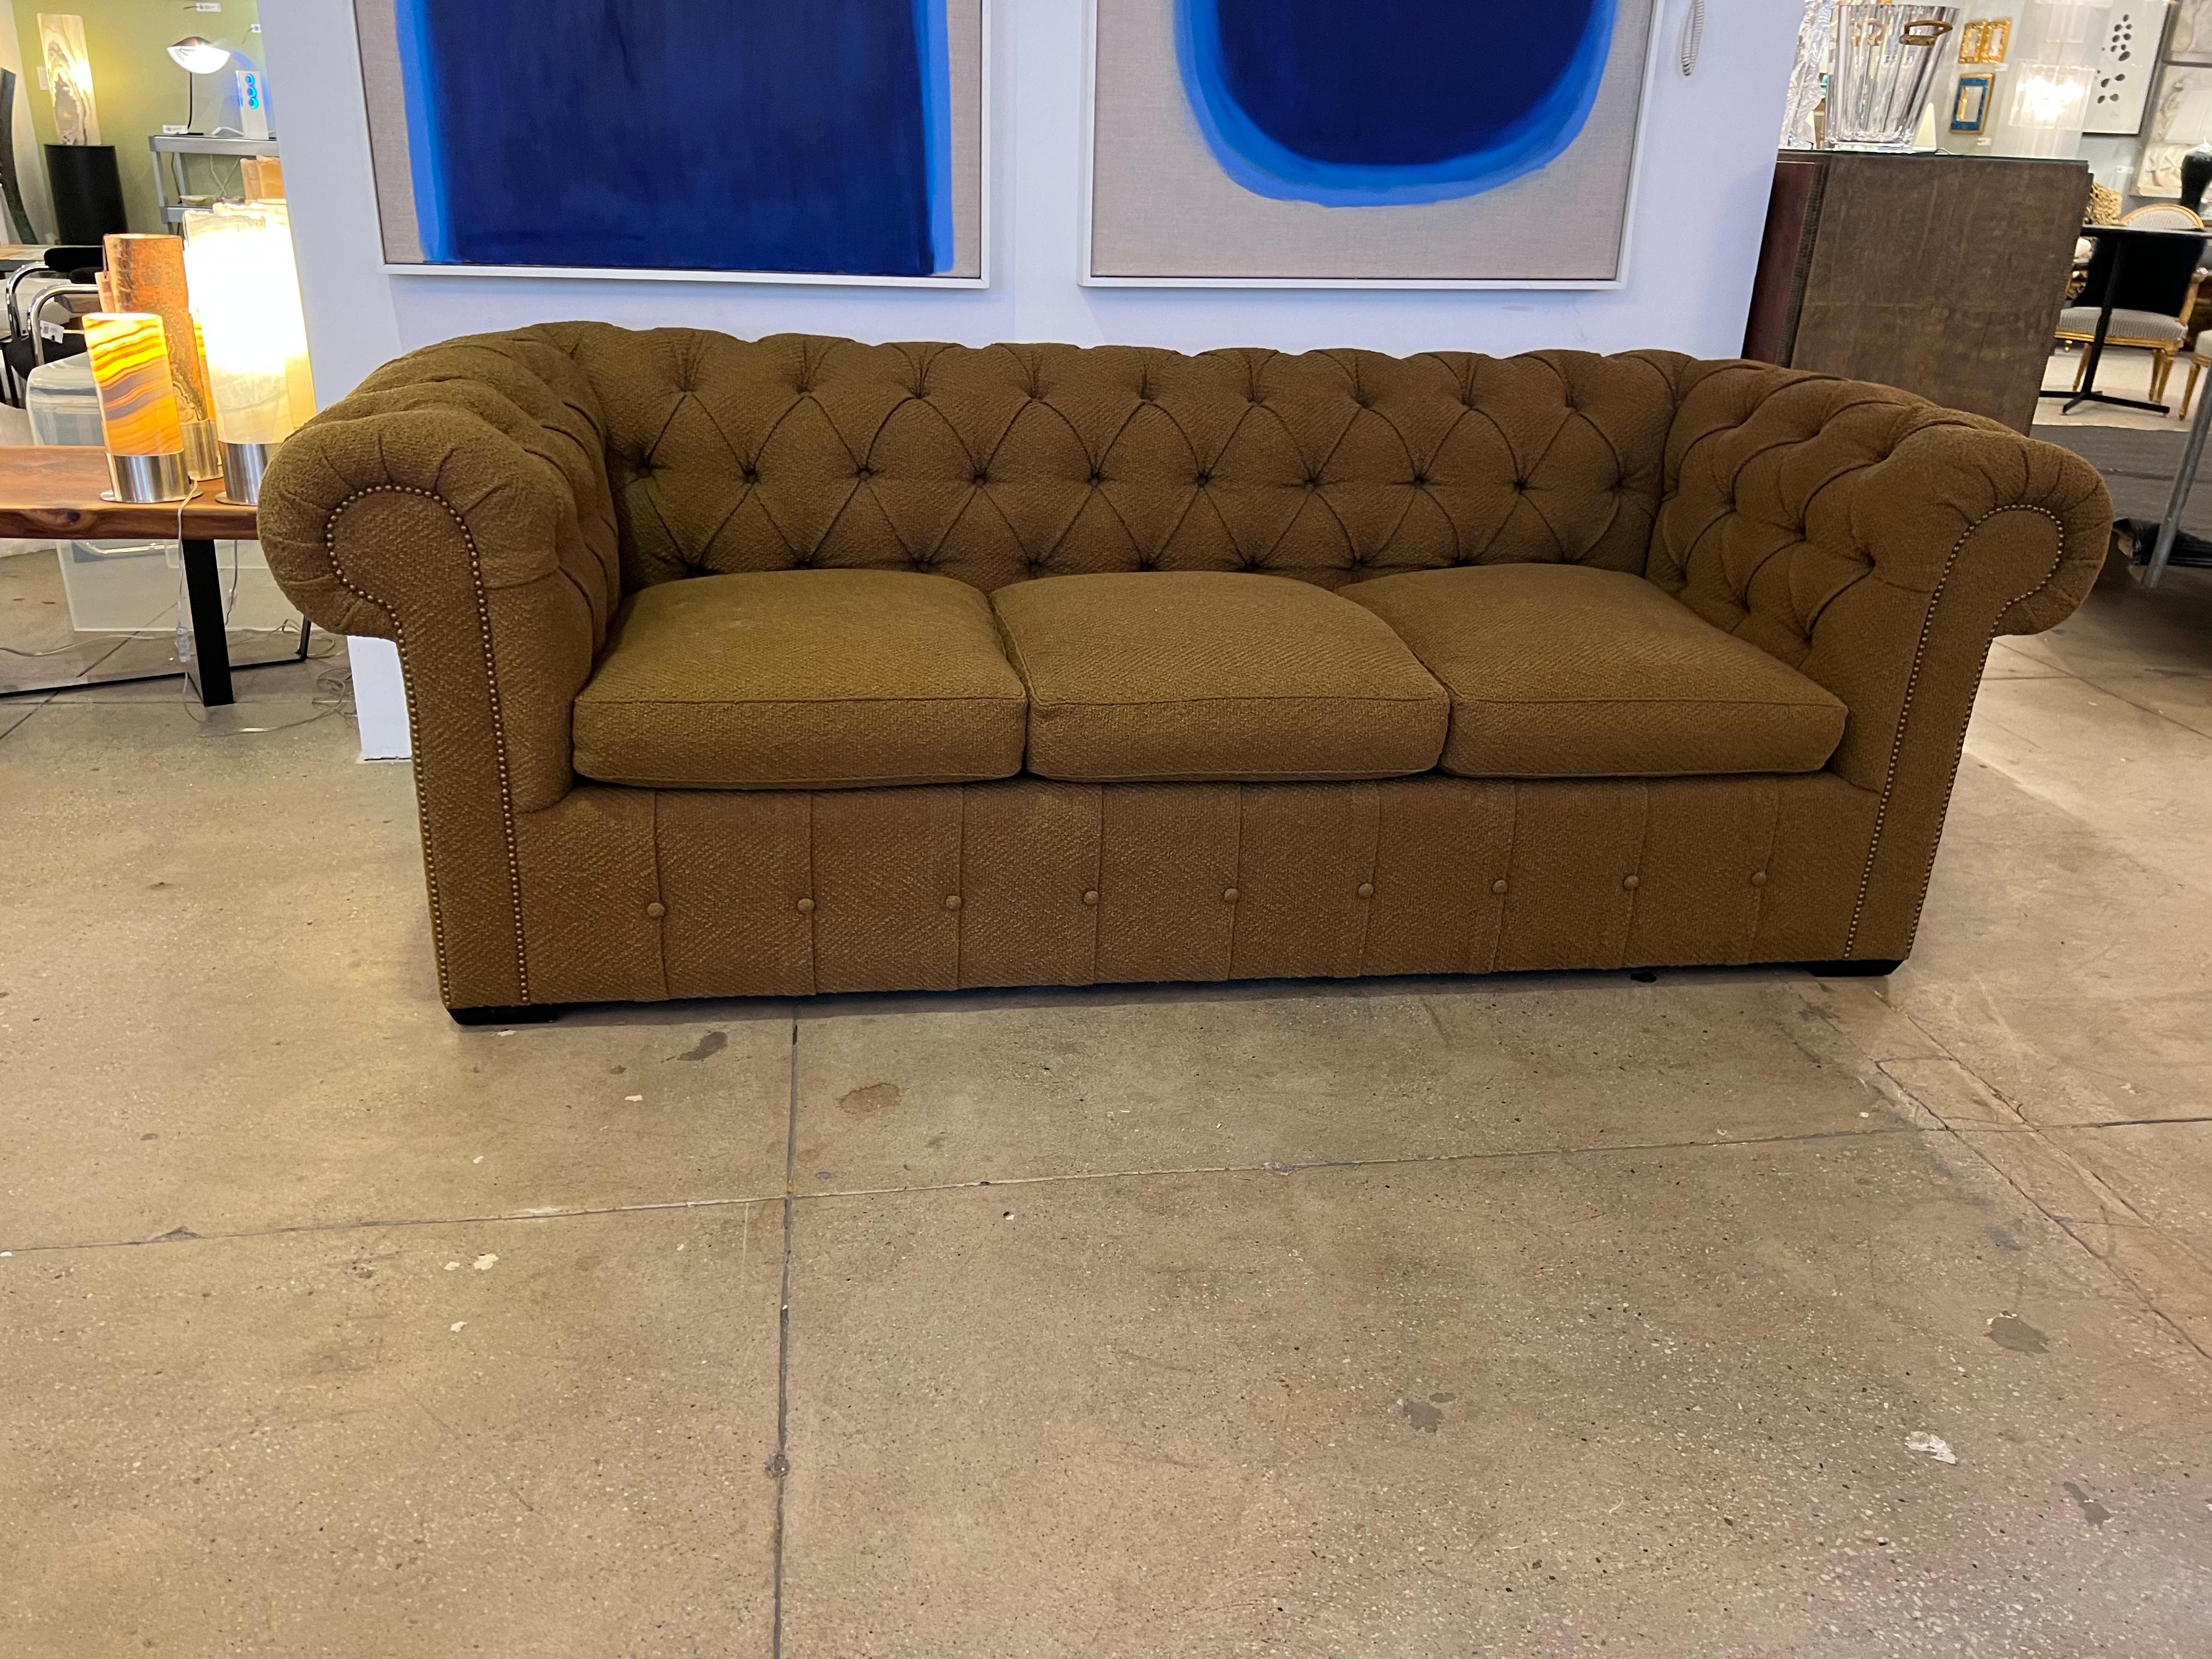 A very comfortable luxurious custom modern take of a classic chesterfield sofa by famed designer, Peter Marino. Excellent shape. 
The color is a medium to light brown with hints of green, Nightingale Brown.